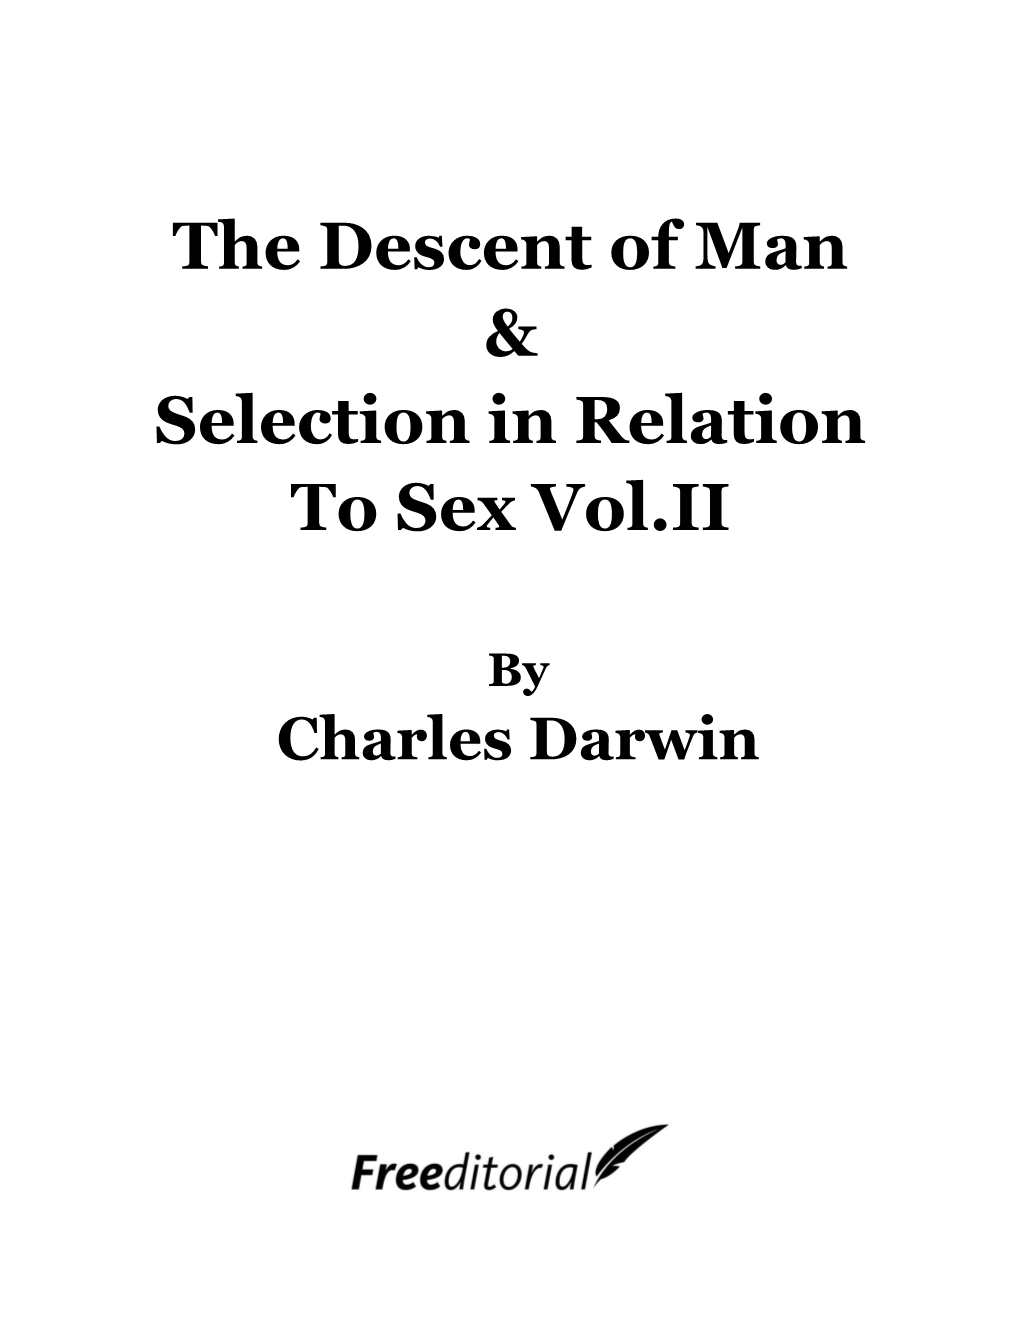 The Descent of Man & Selection in Relation to Sex Vol.II